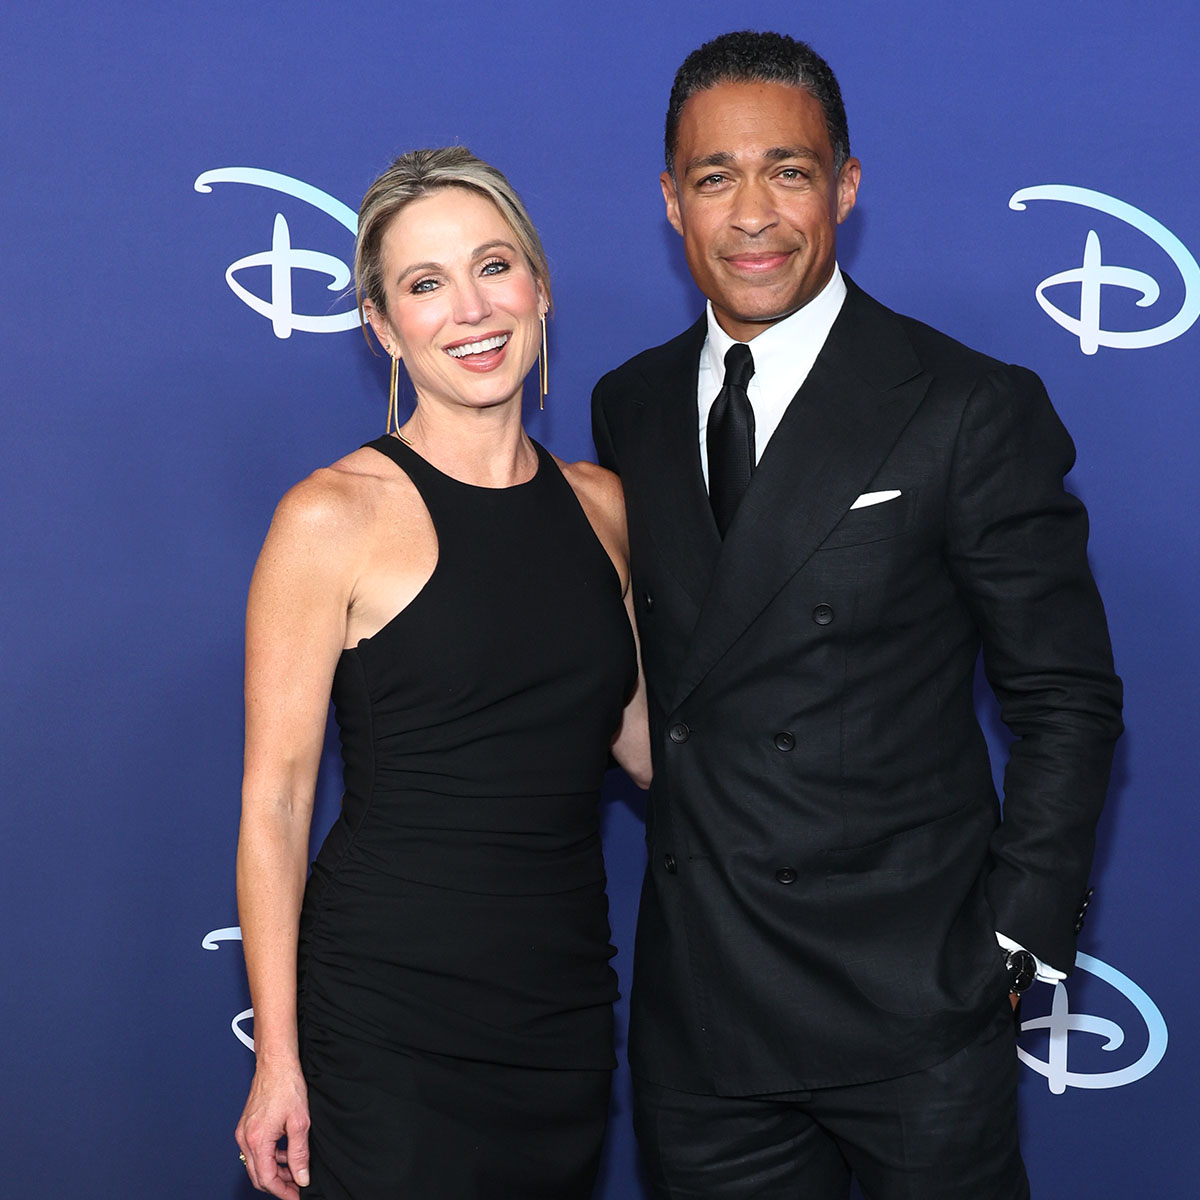 Amy Robach and T.J. Holmes Pack on the PDA After GMA3 Exit